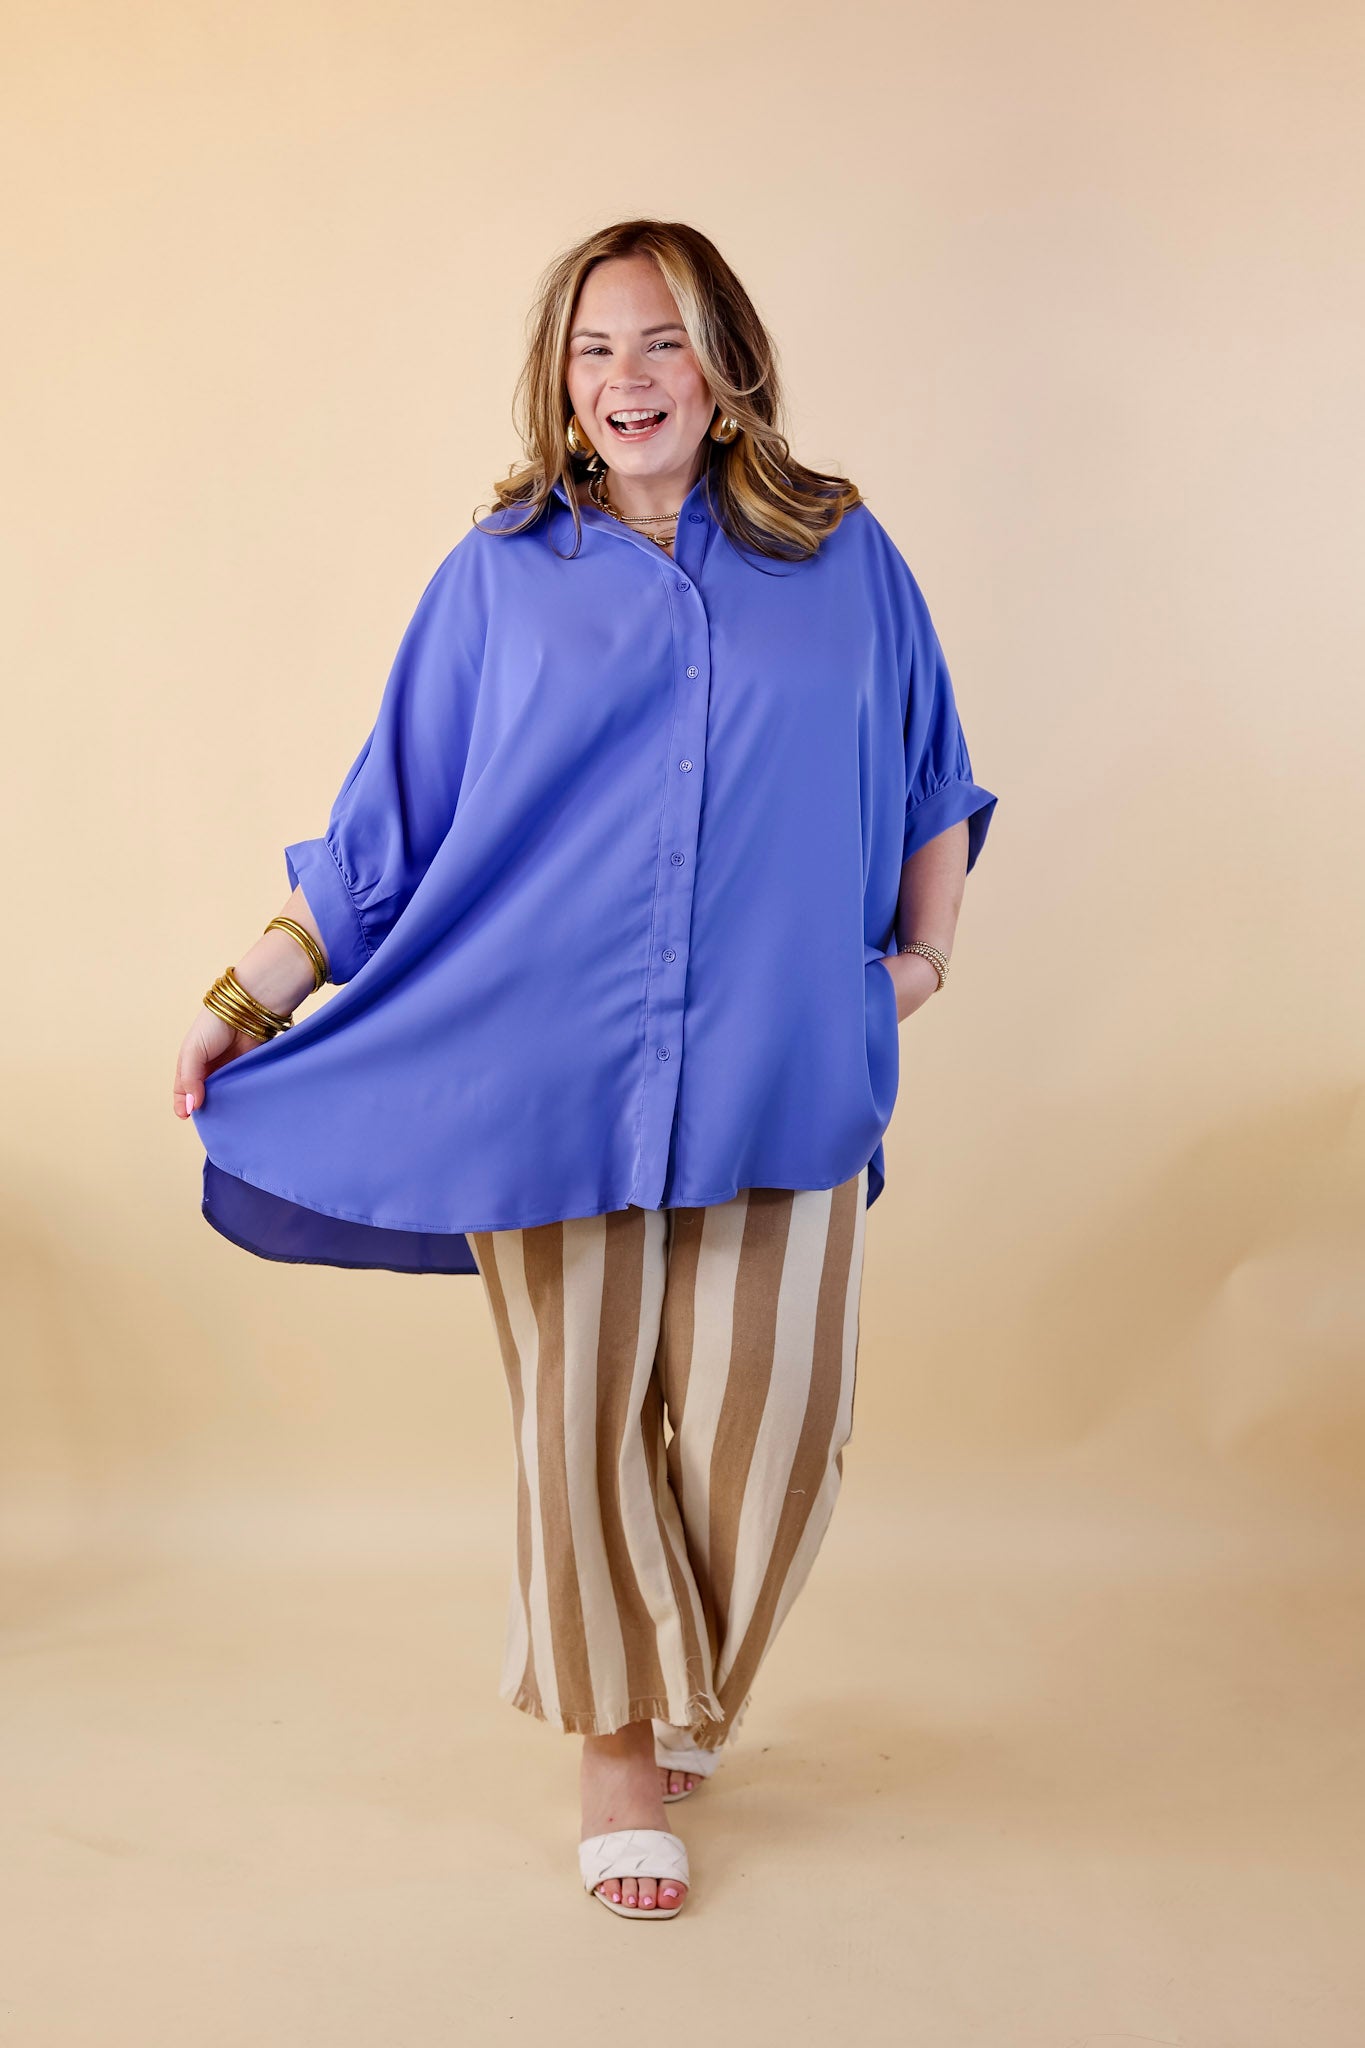 Right On Cue Elastic Waistband Striped Cropped Pants with Frayed Hem in Taupe - Giddy Up Glamour Boutique